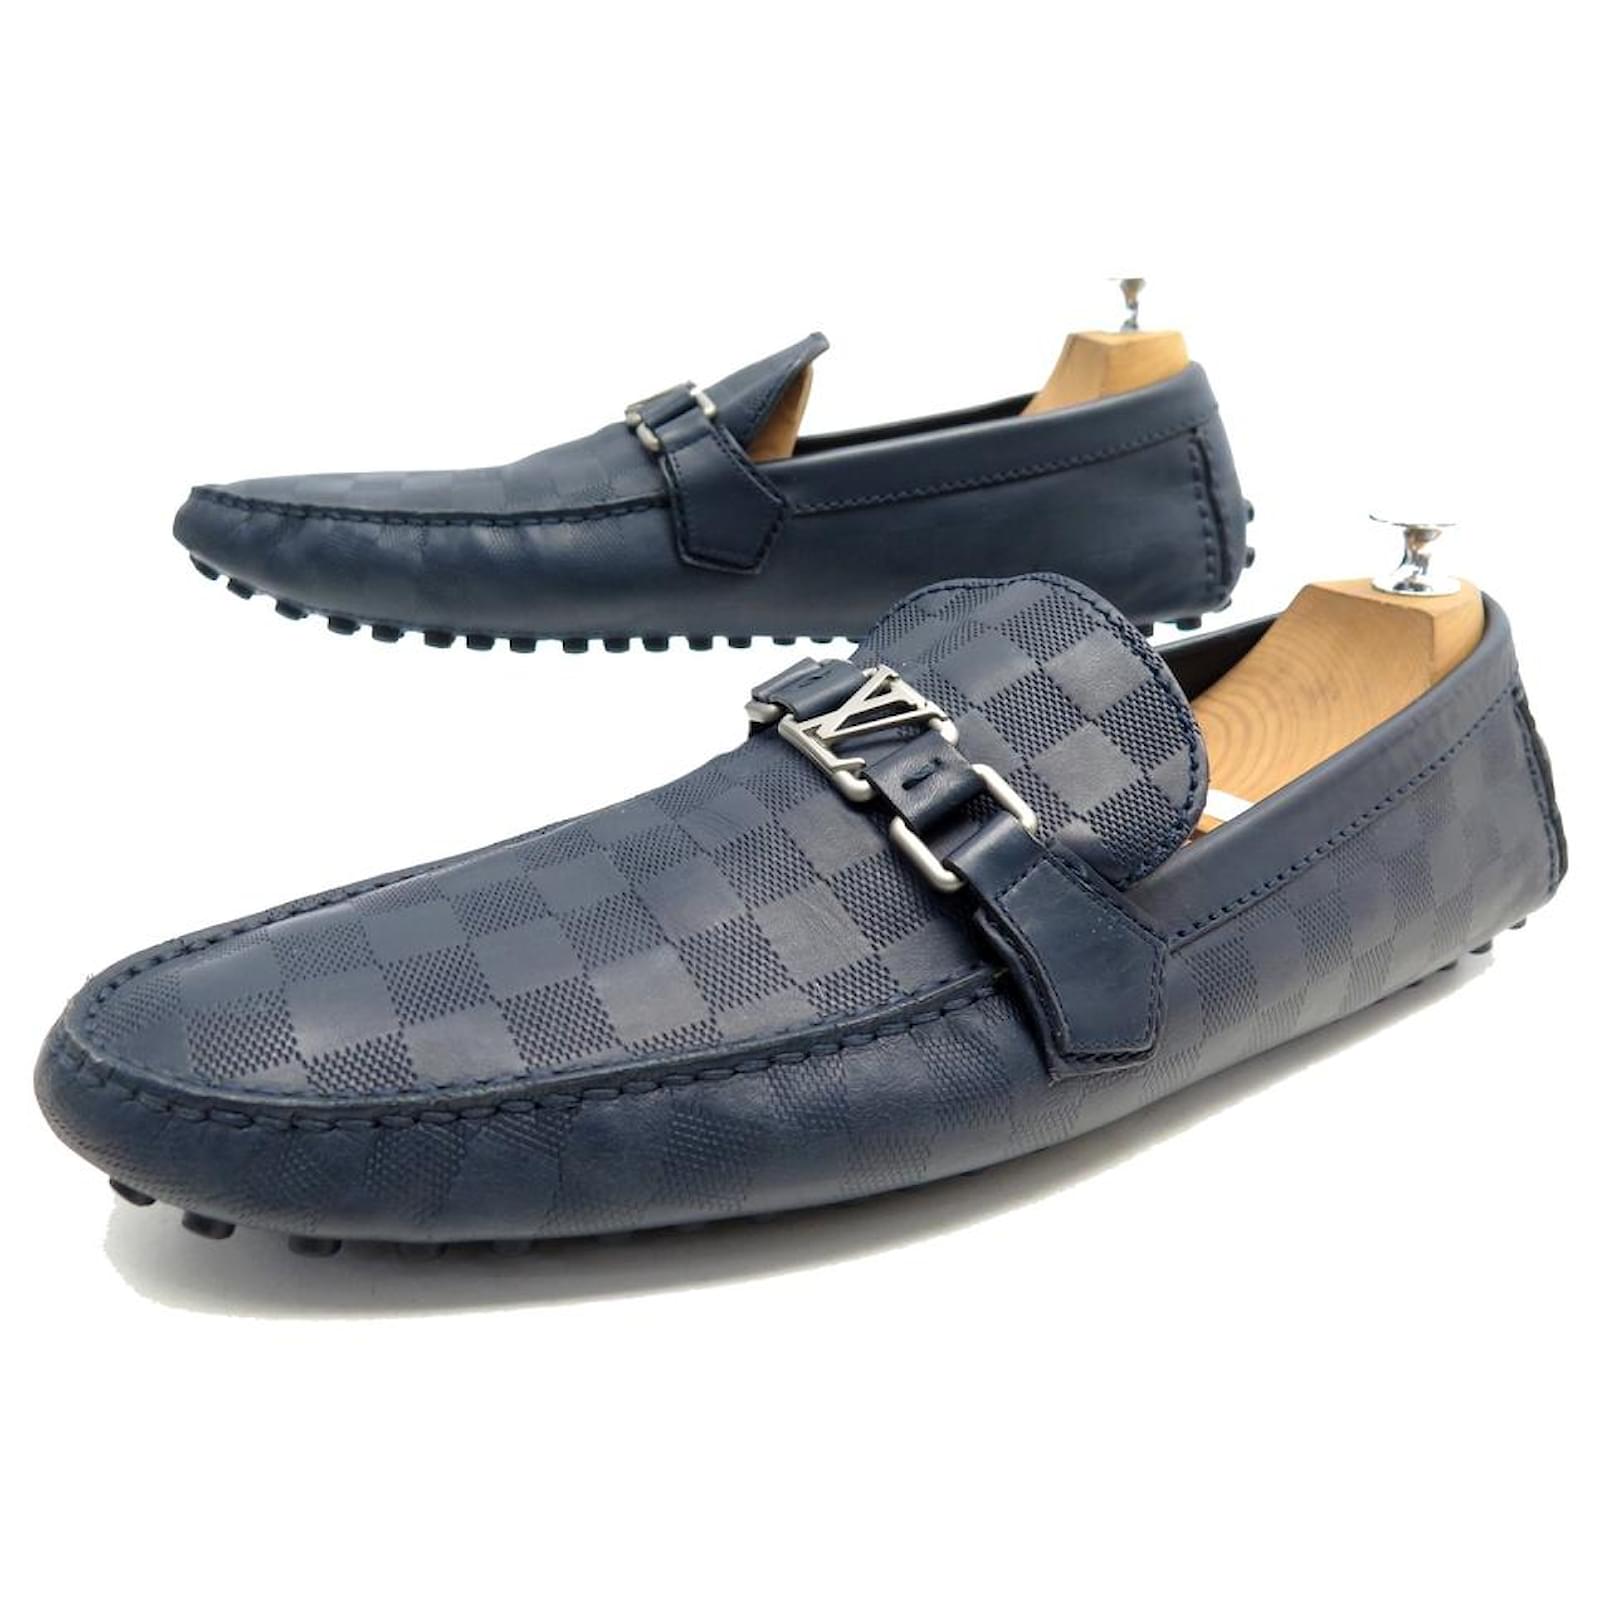 LOUIS VUITTON SHOES HOCKENHEIM MOCCASIN 13 47 CHECKERBOARD LOAFER SHOES  Navy blue Leather ref.875178 - Joli Closet